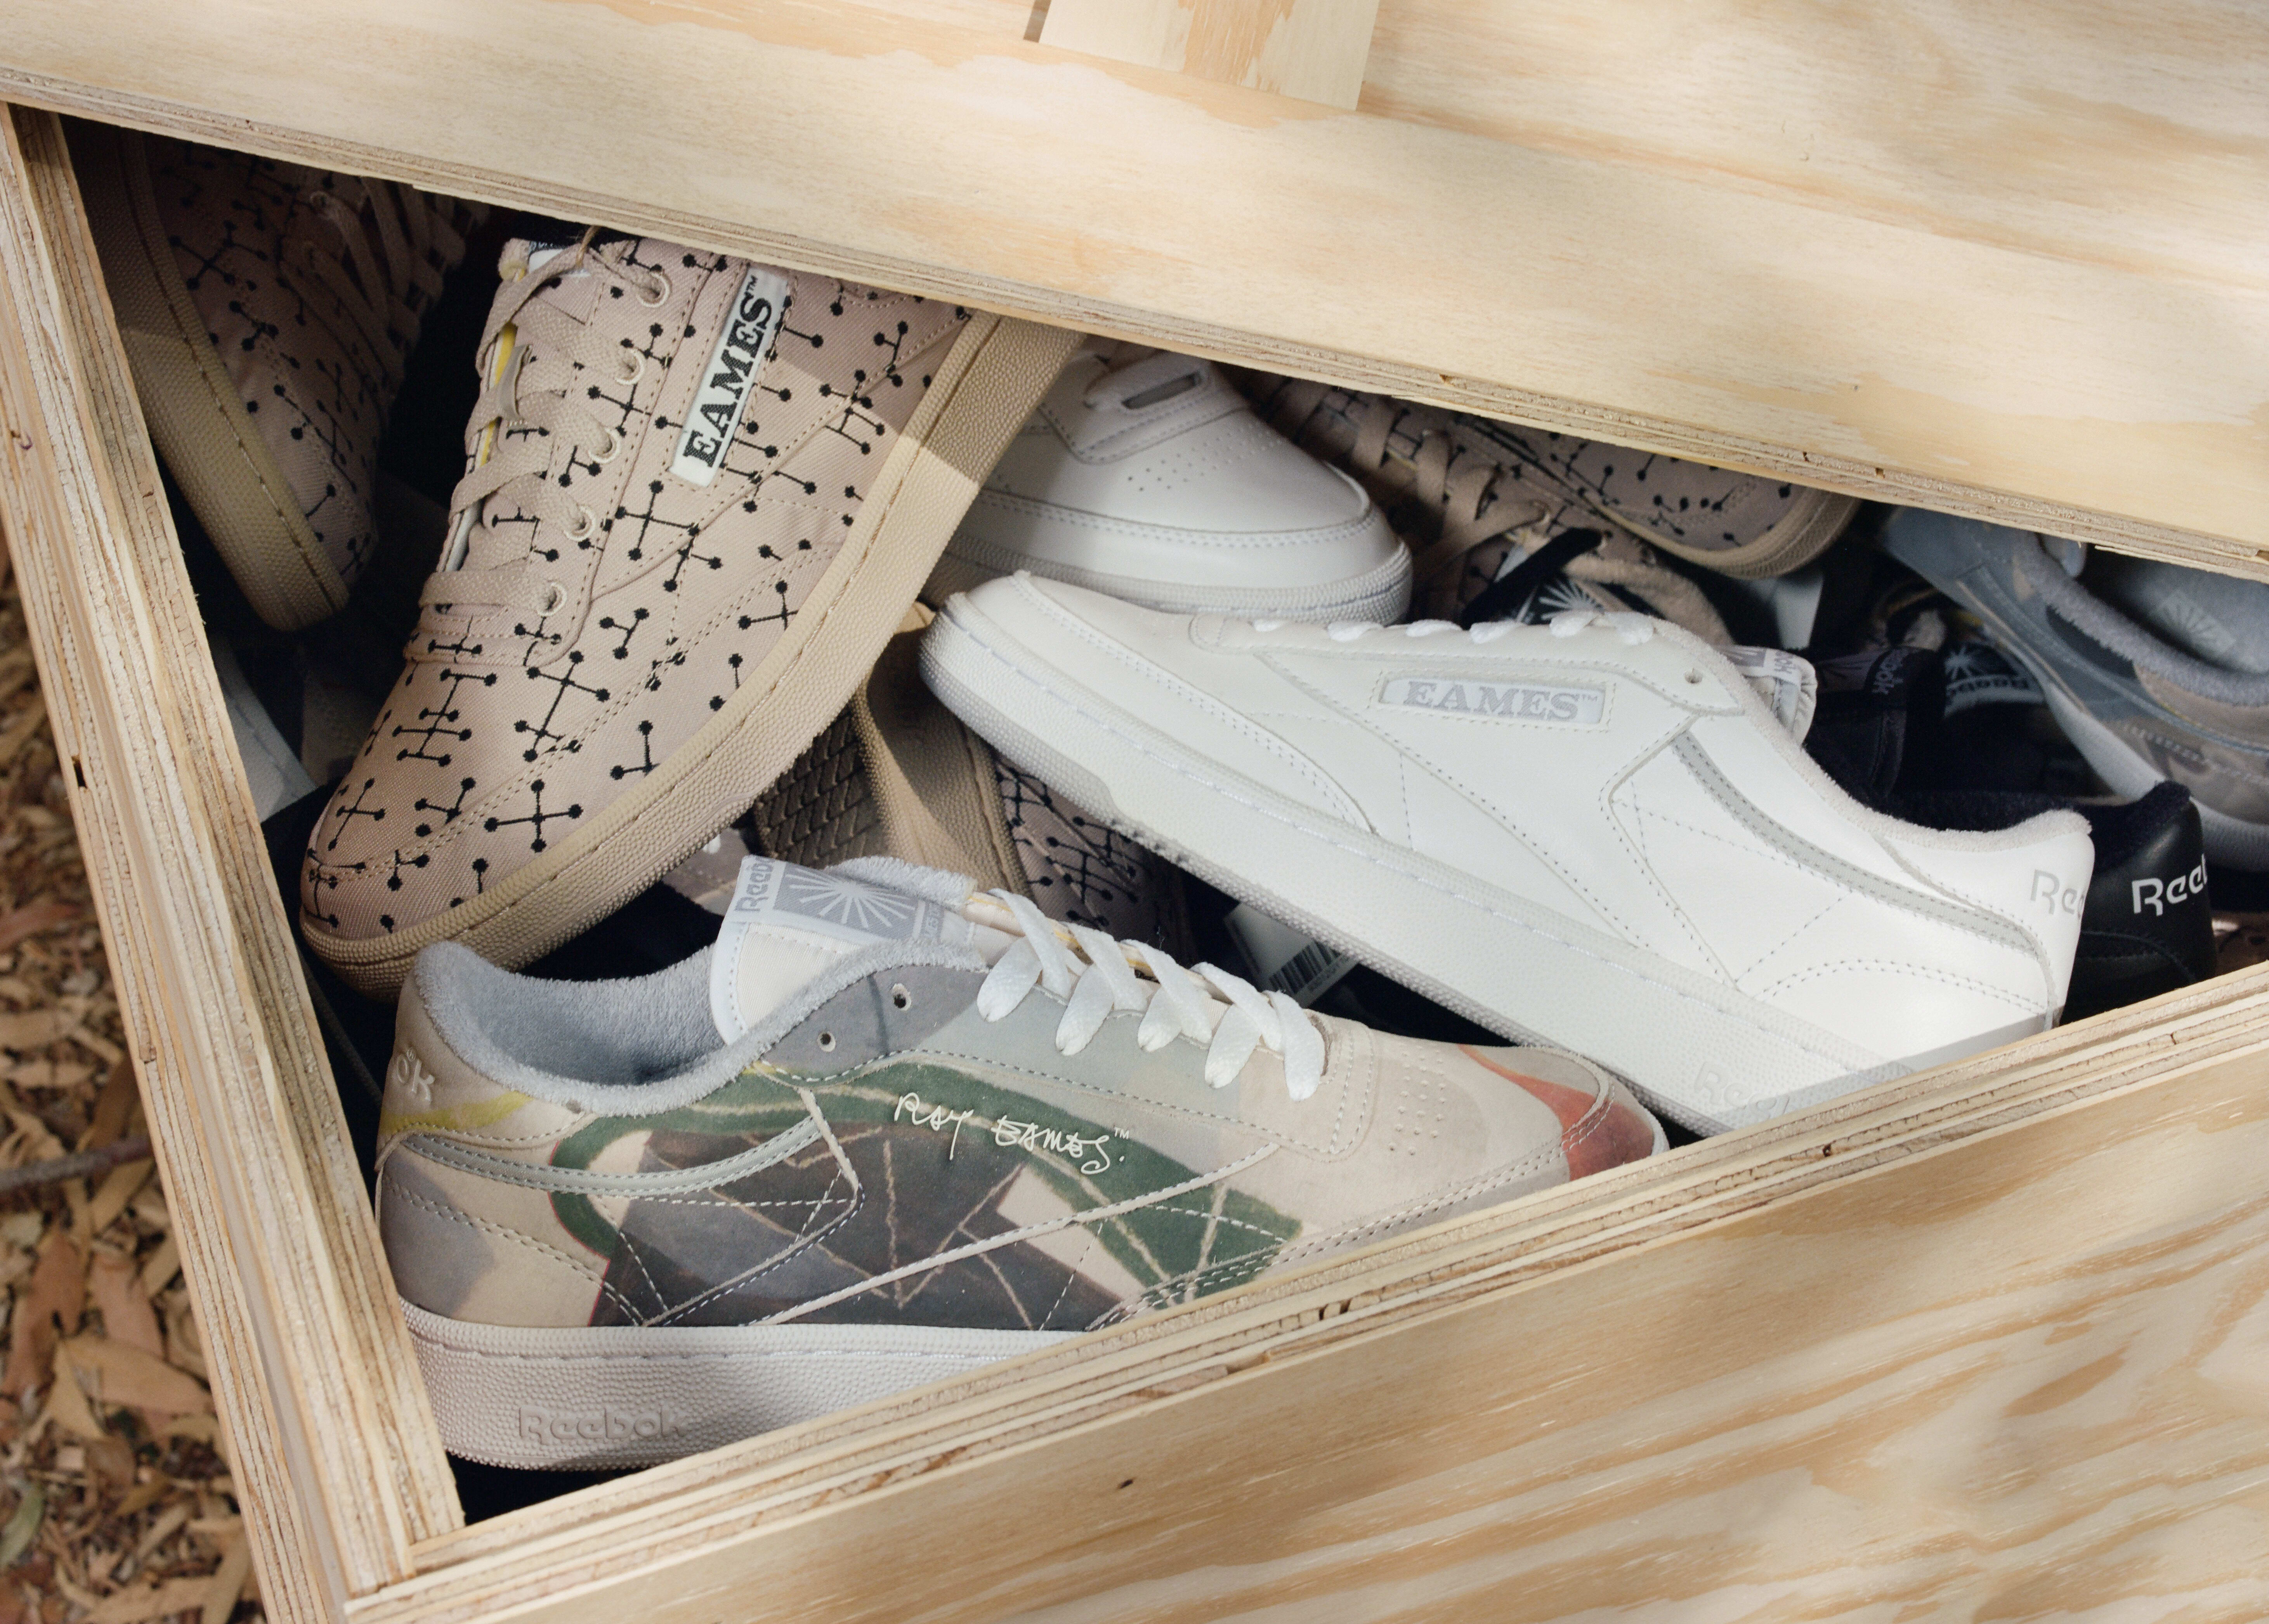 Eames Office x Reebok Club C Collection